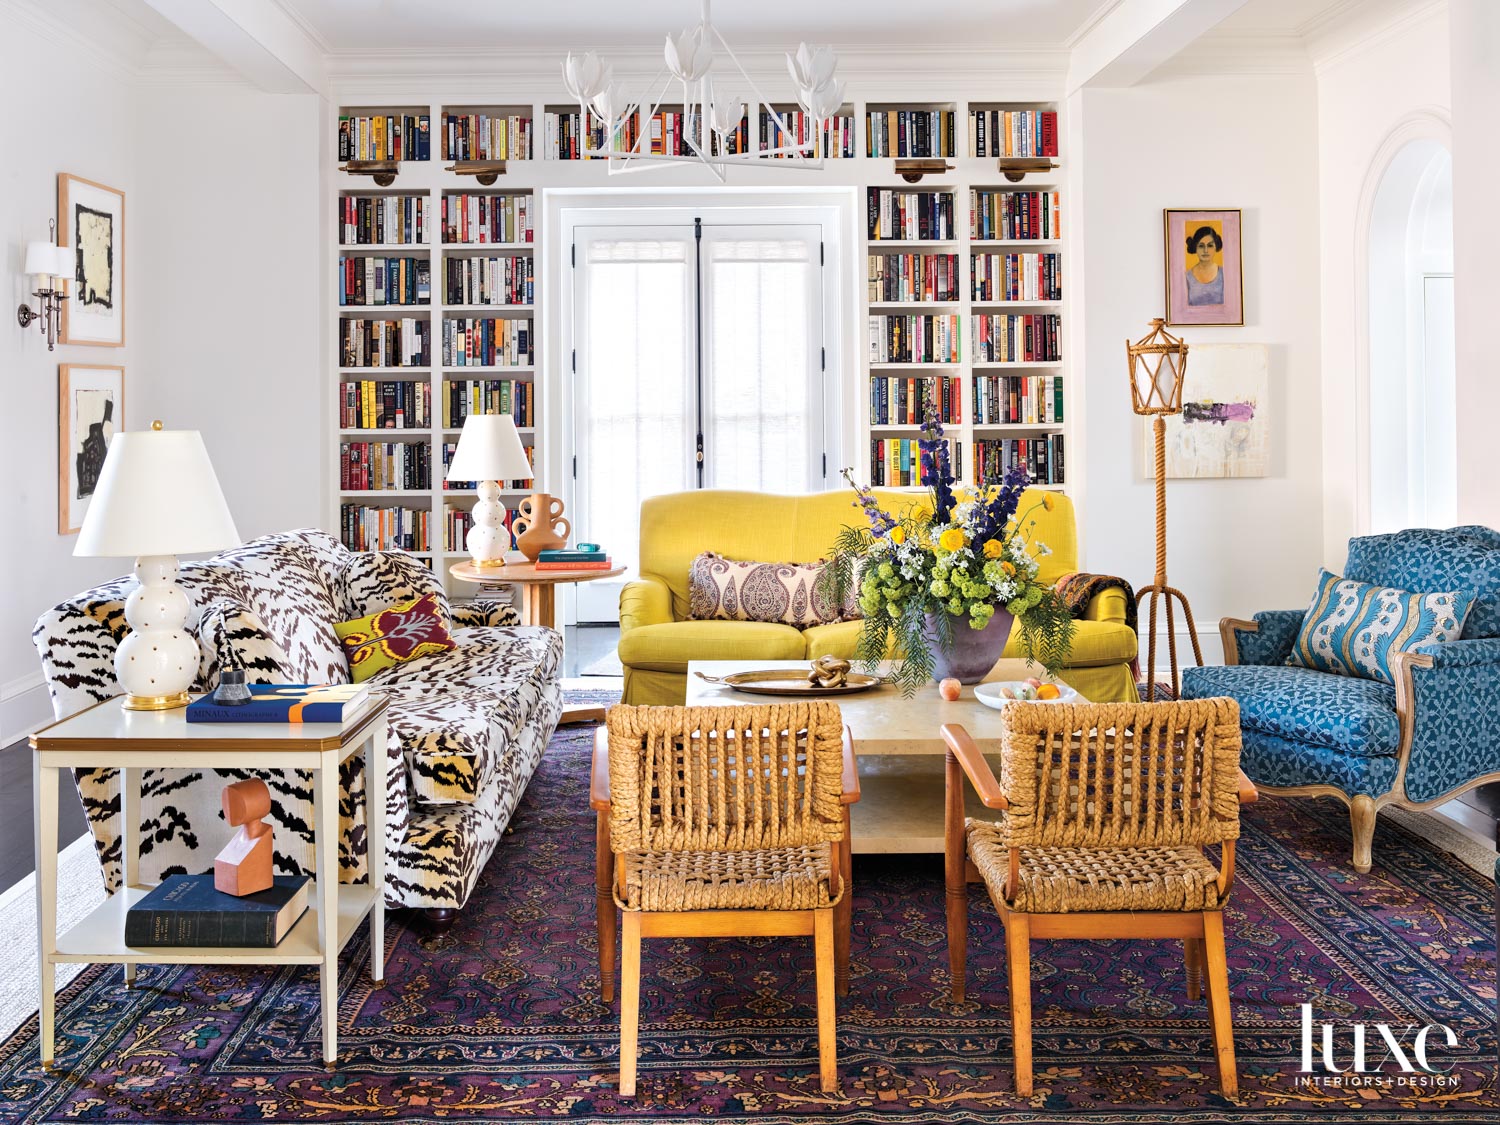 English Eclecticism Ups The Fun Factor Of A Historic Chicago Home